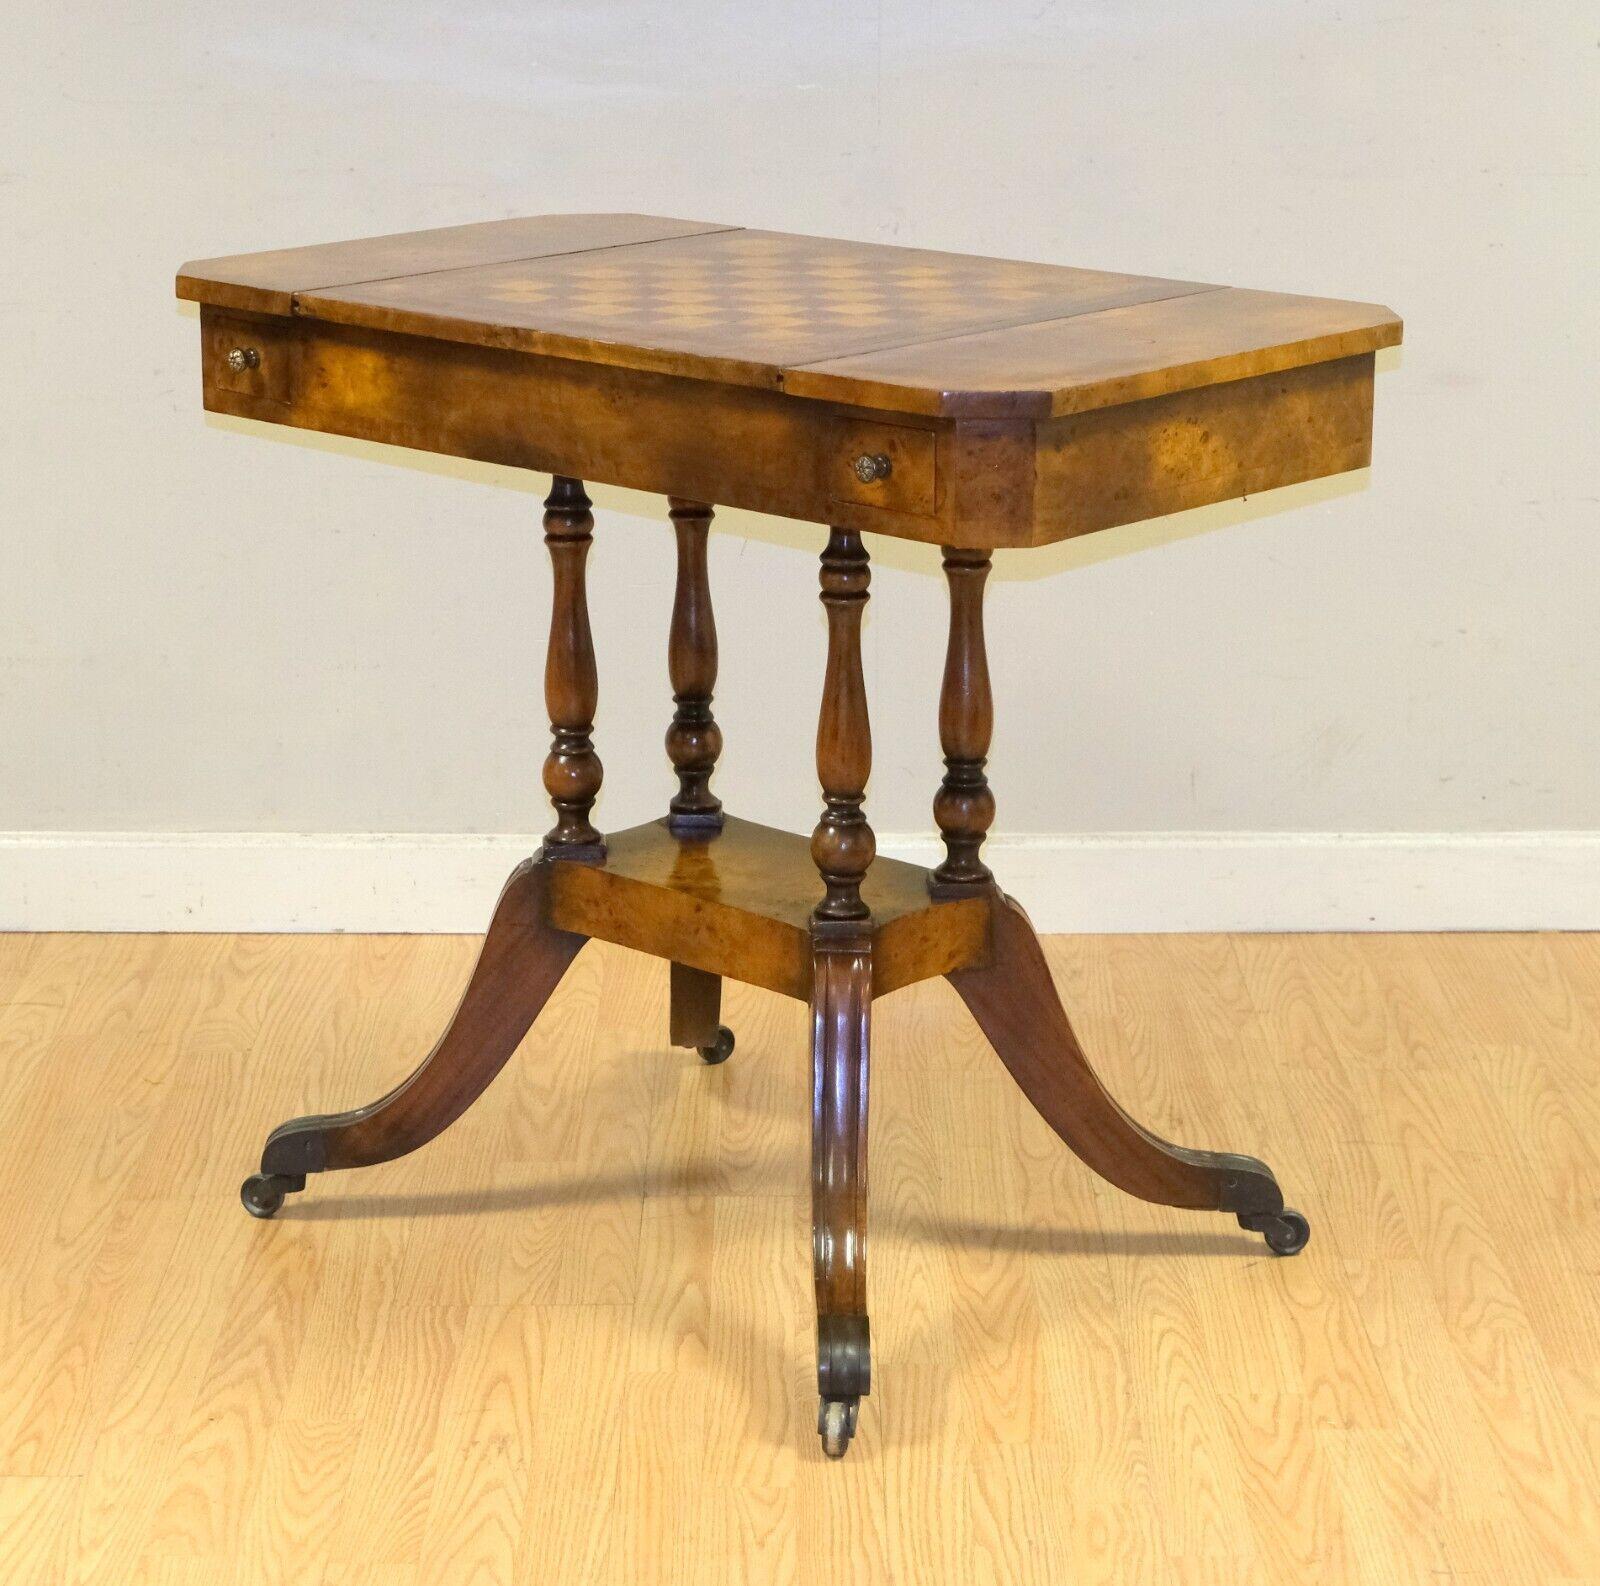 Victorian THEODORE ALEXANDER BURR WALNUT BROWN LEATHER GAME CHEDD TABLE REVERSiBLE TOP